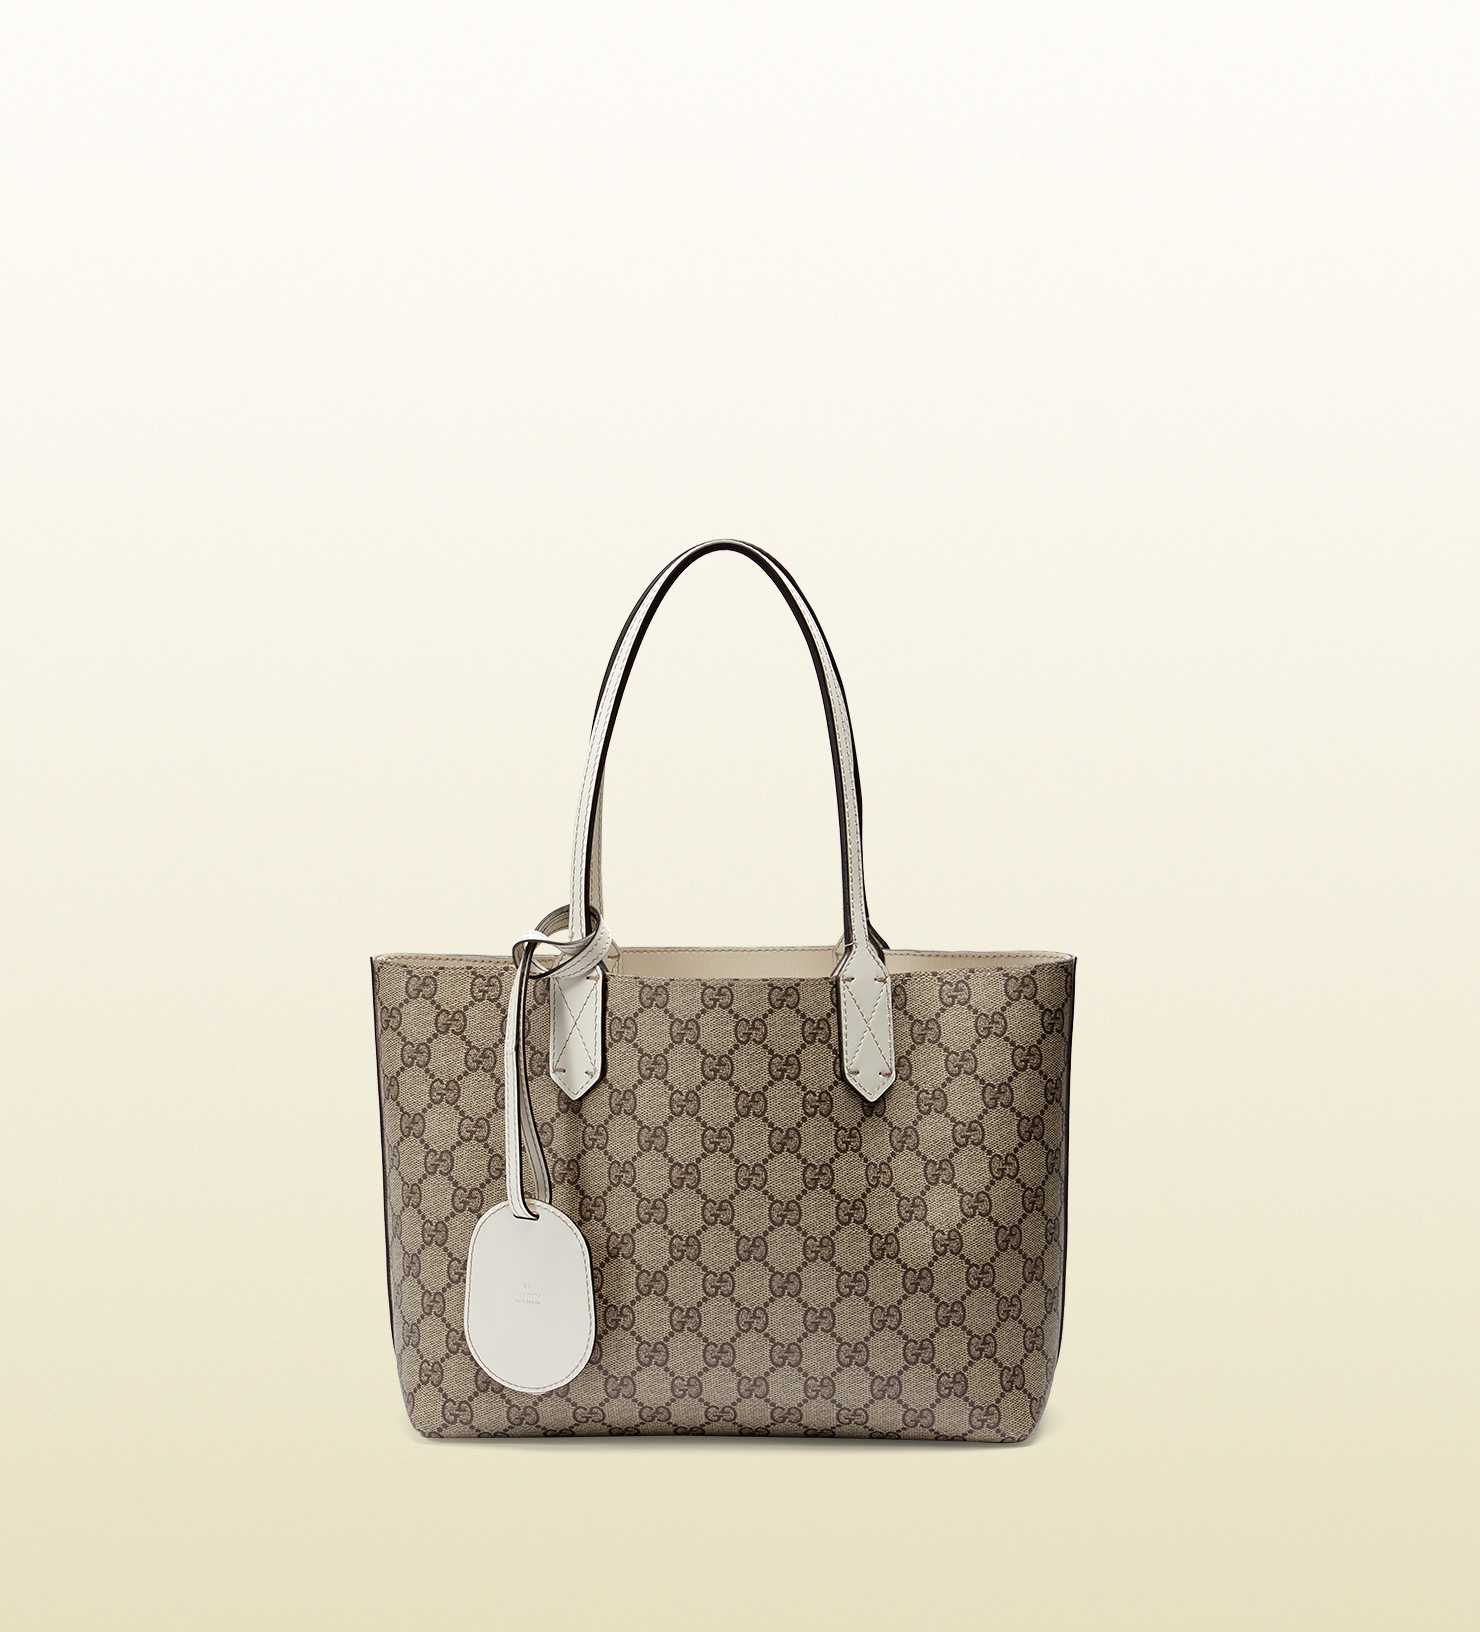 Gucci Reversible Gg Leather Tote in White - Lyst